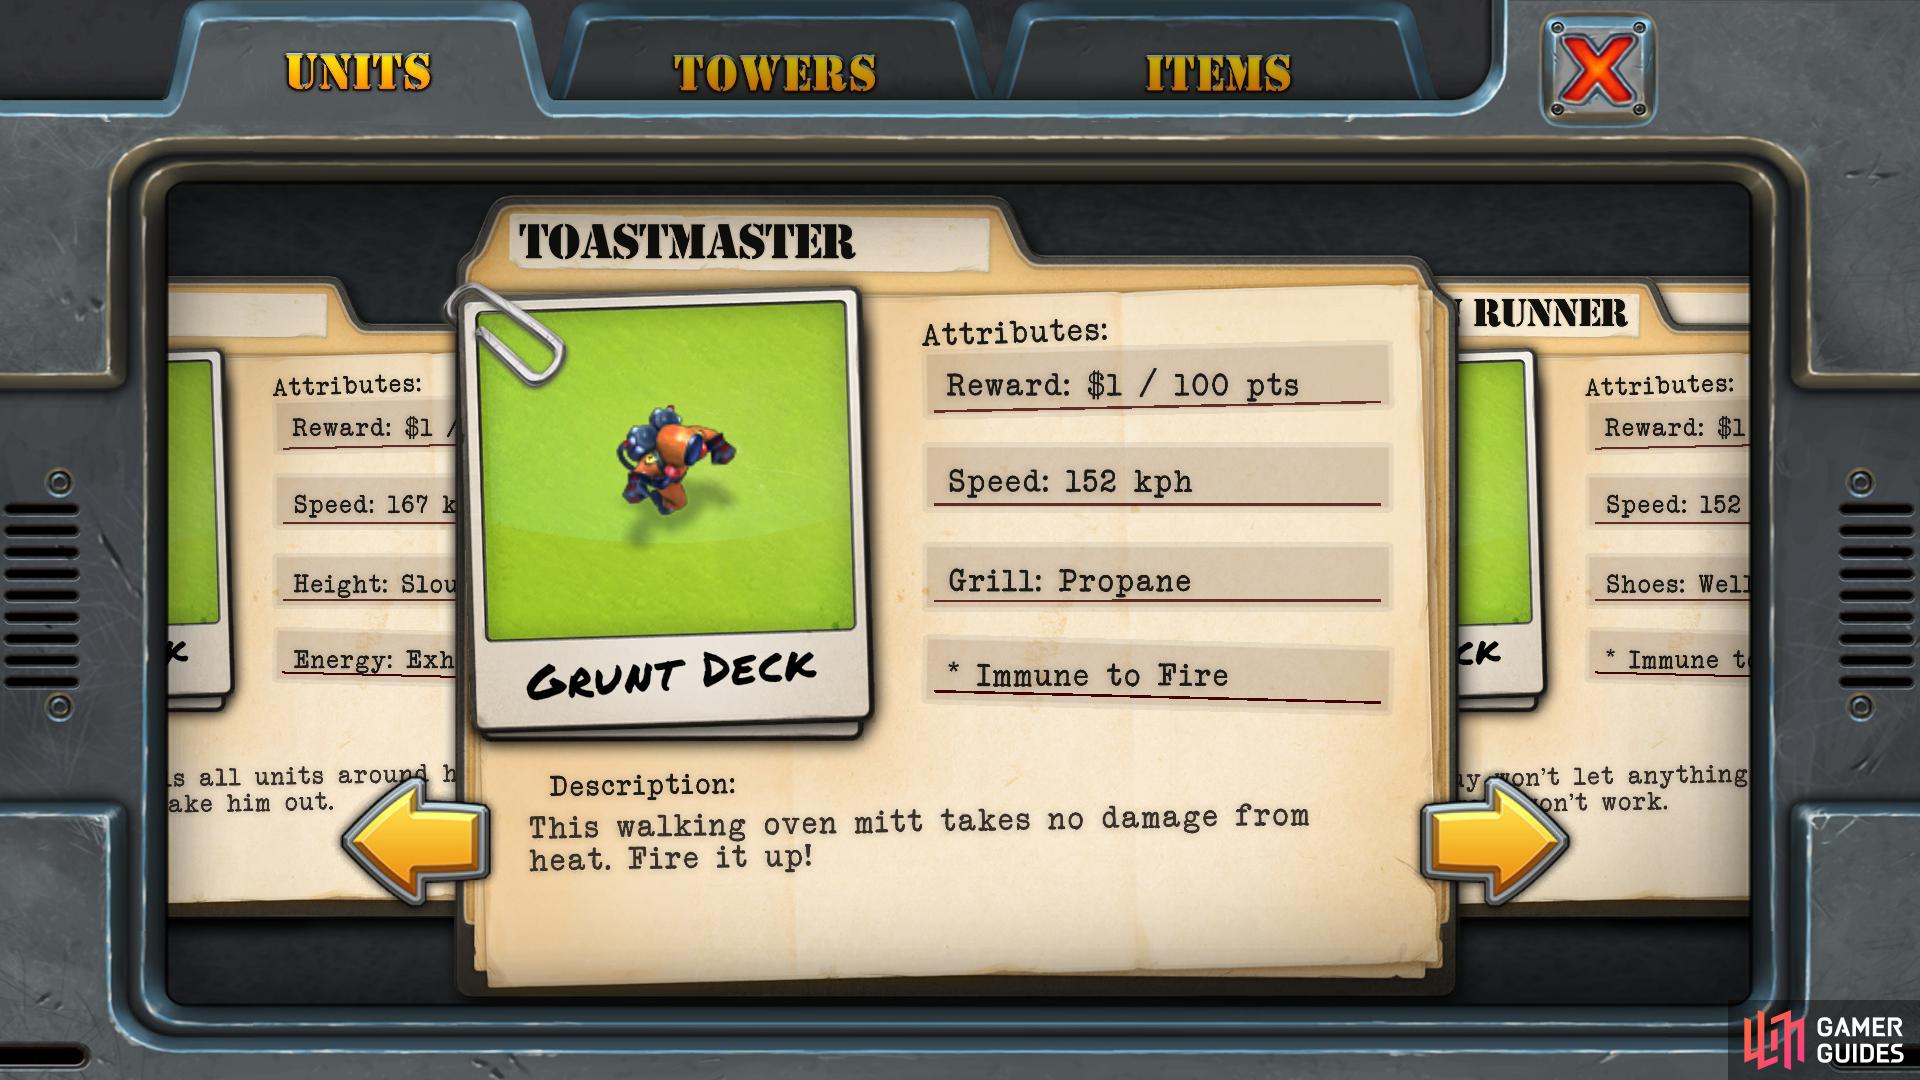 Each of the non-vehicle based units below contribute towards completing the ‘Grunt Deck’ achievements/cards.